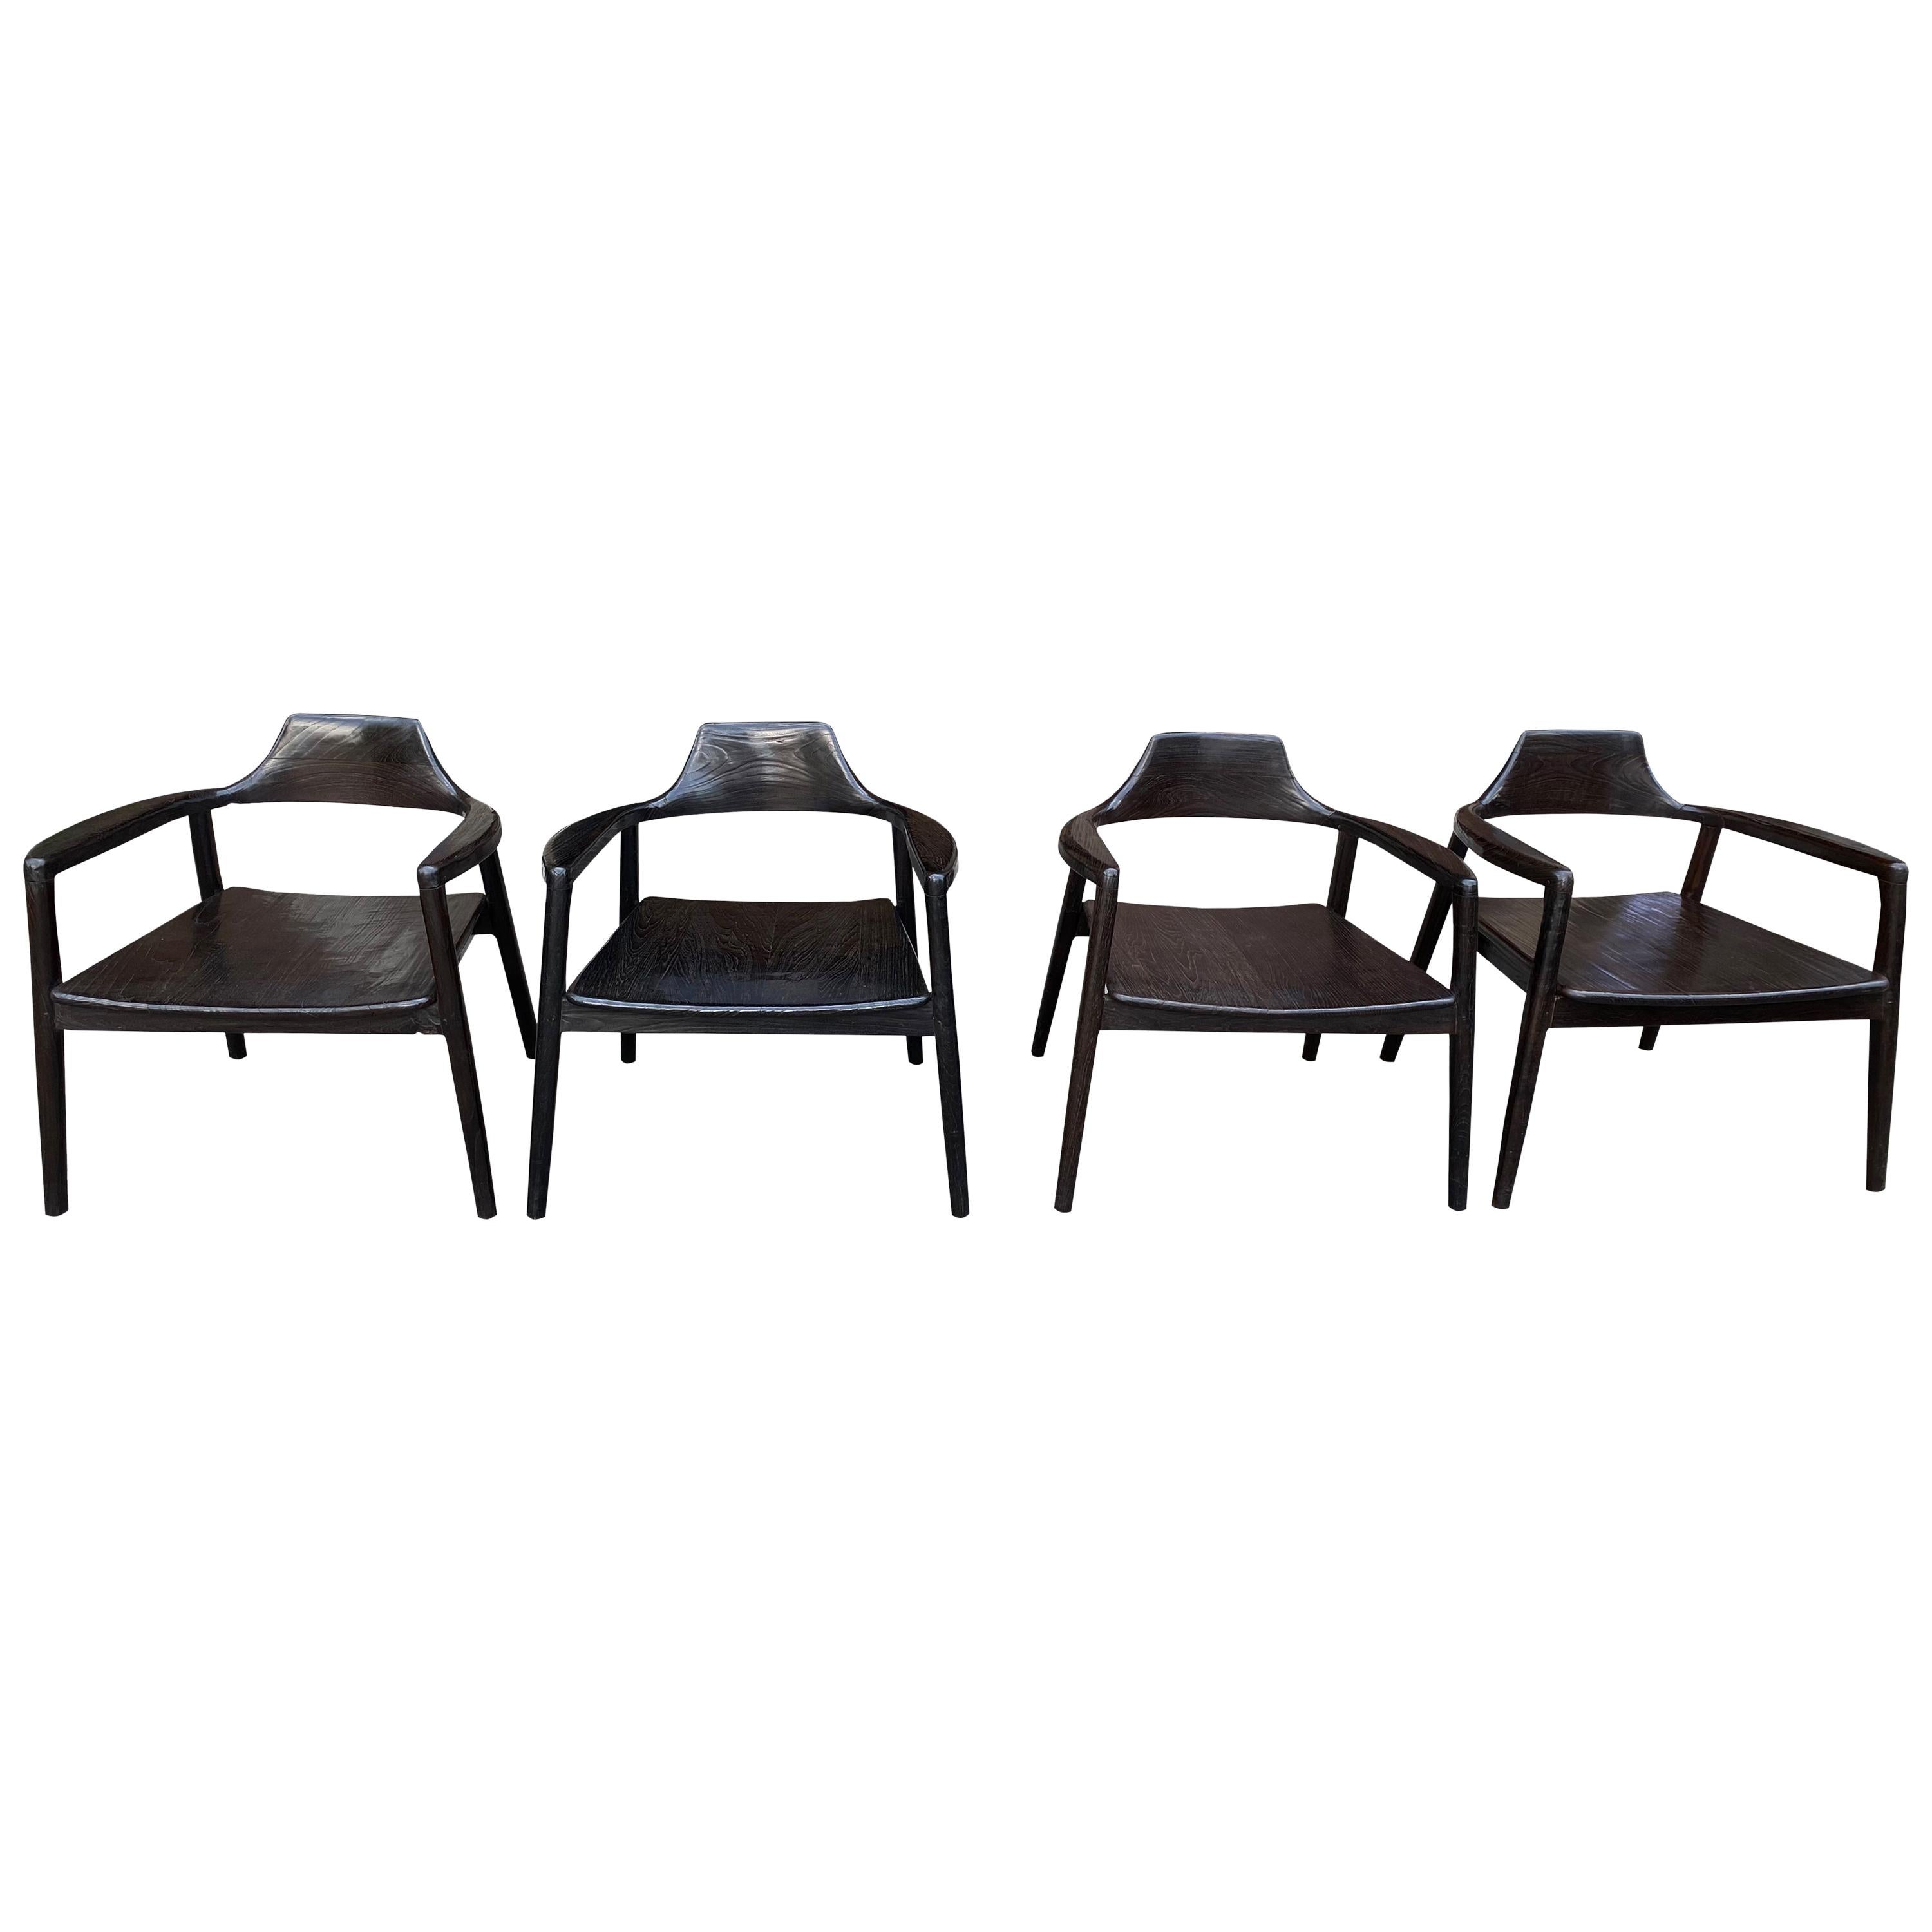 Andrianna Shamaris Midcentury Couture Set of Four Chairs For Sale